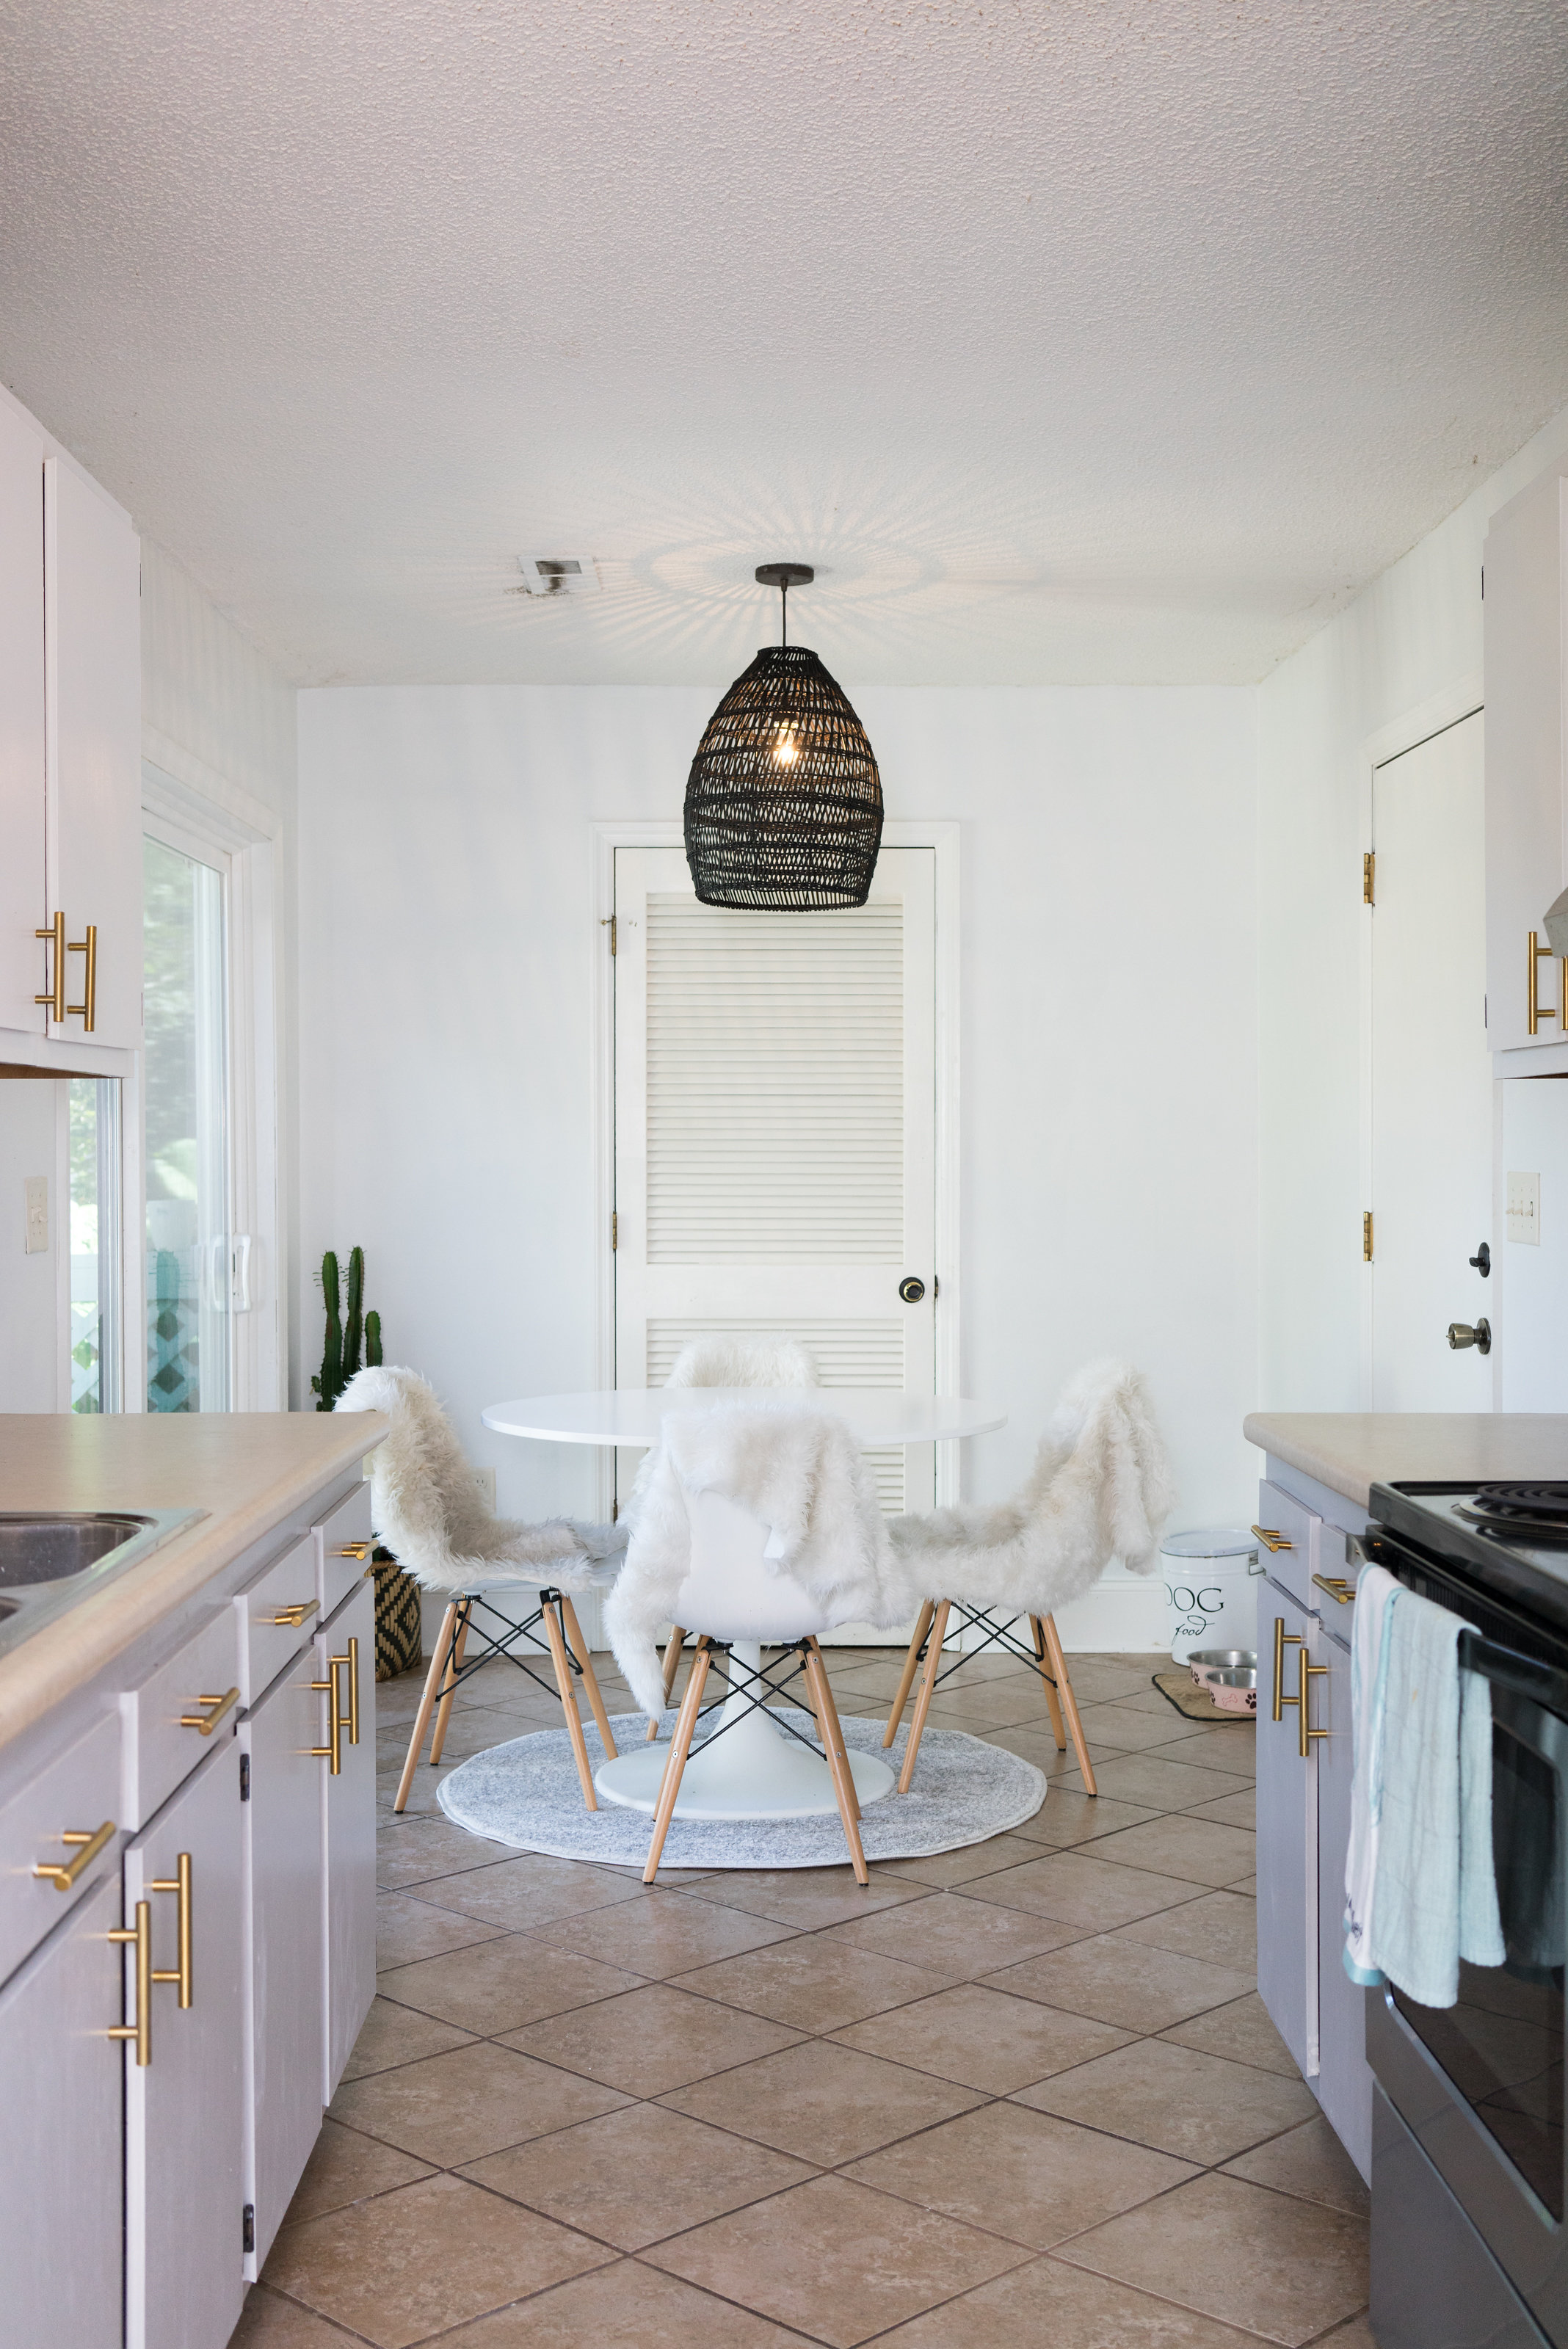 House Tour: A modern midcentury kitchen looking into a small dining area